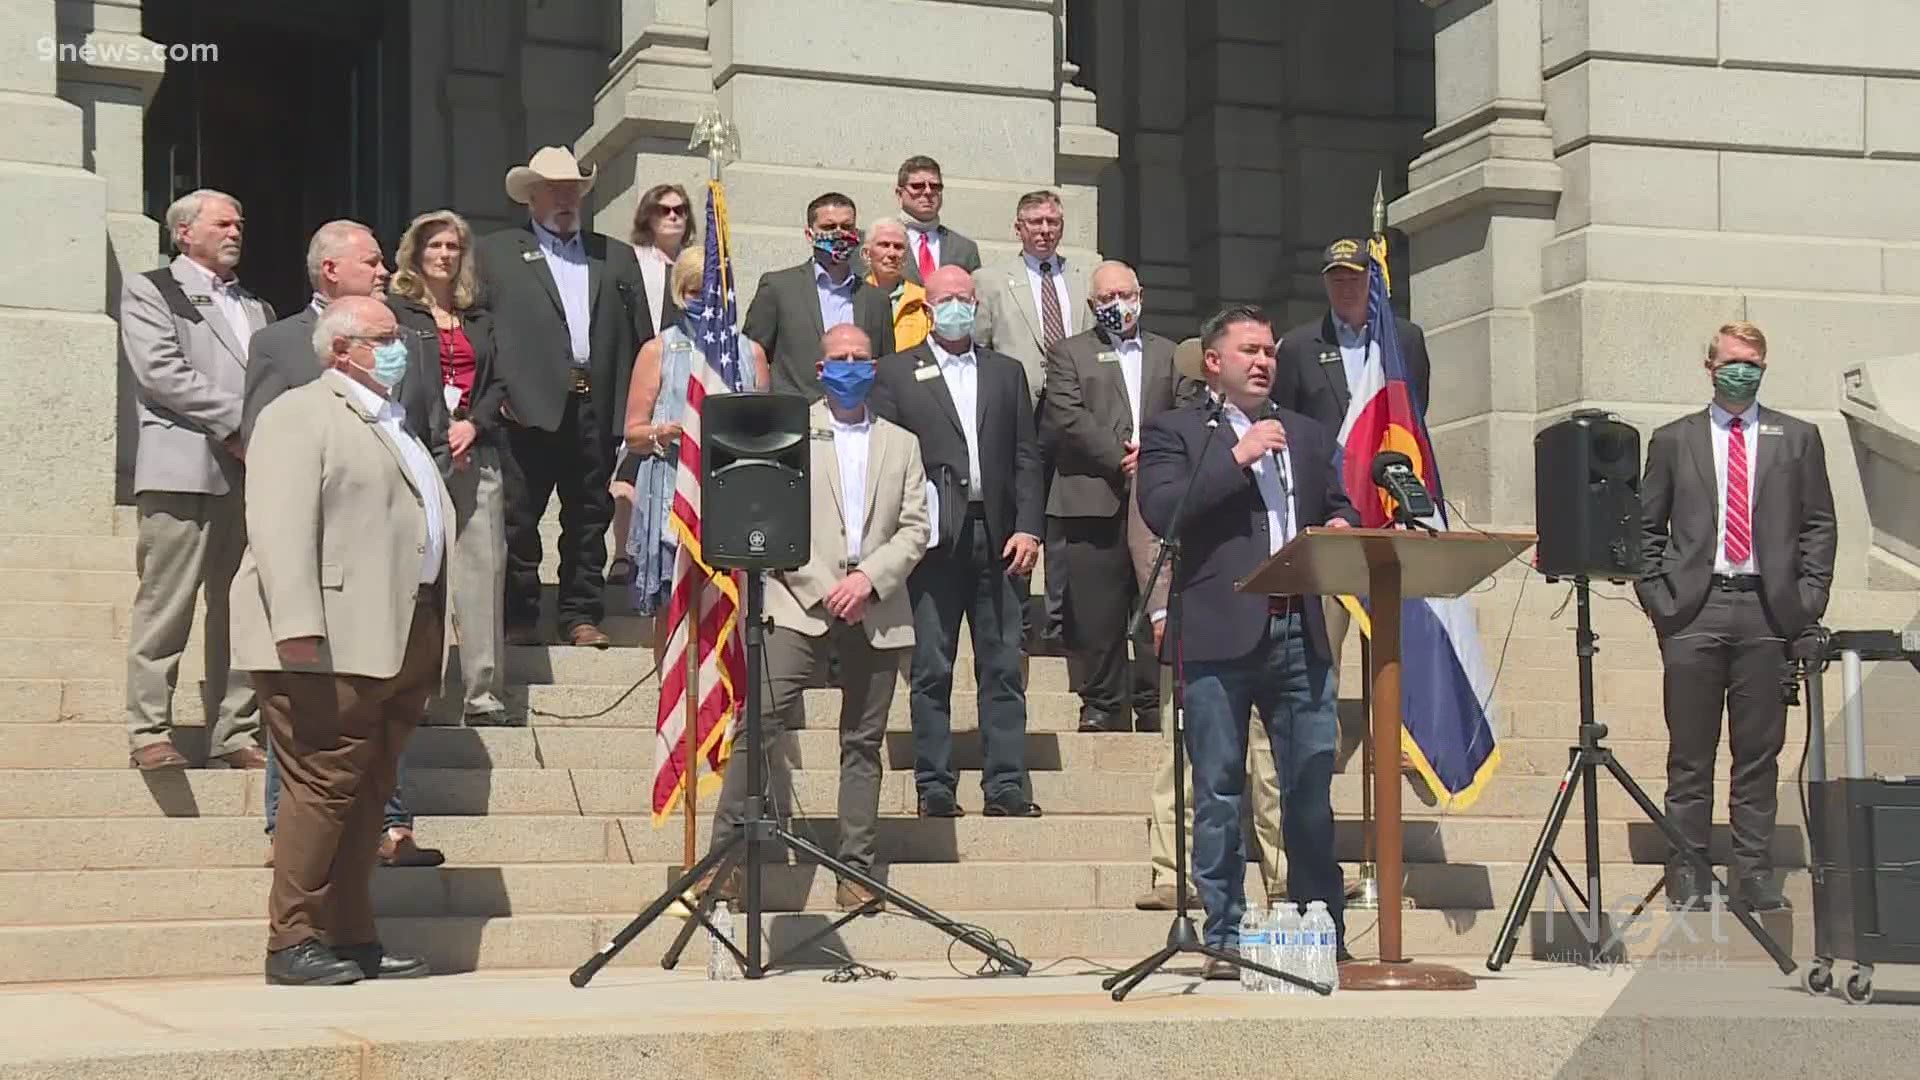 Colorado Republicans have relatively little political power now, but some have flexed their influence over pandemic policy. They met on the Capitol steps Monday.